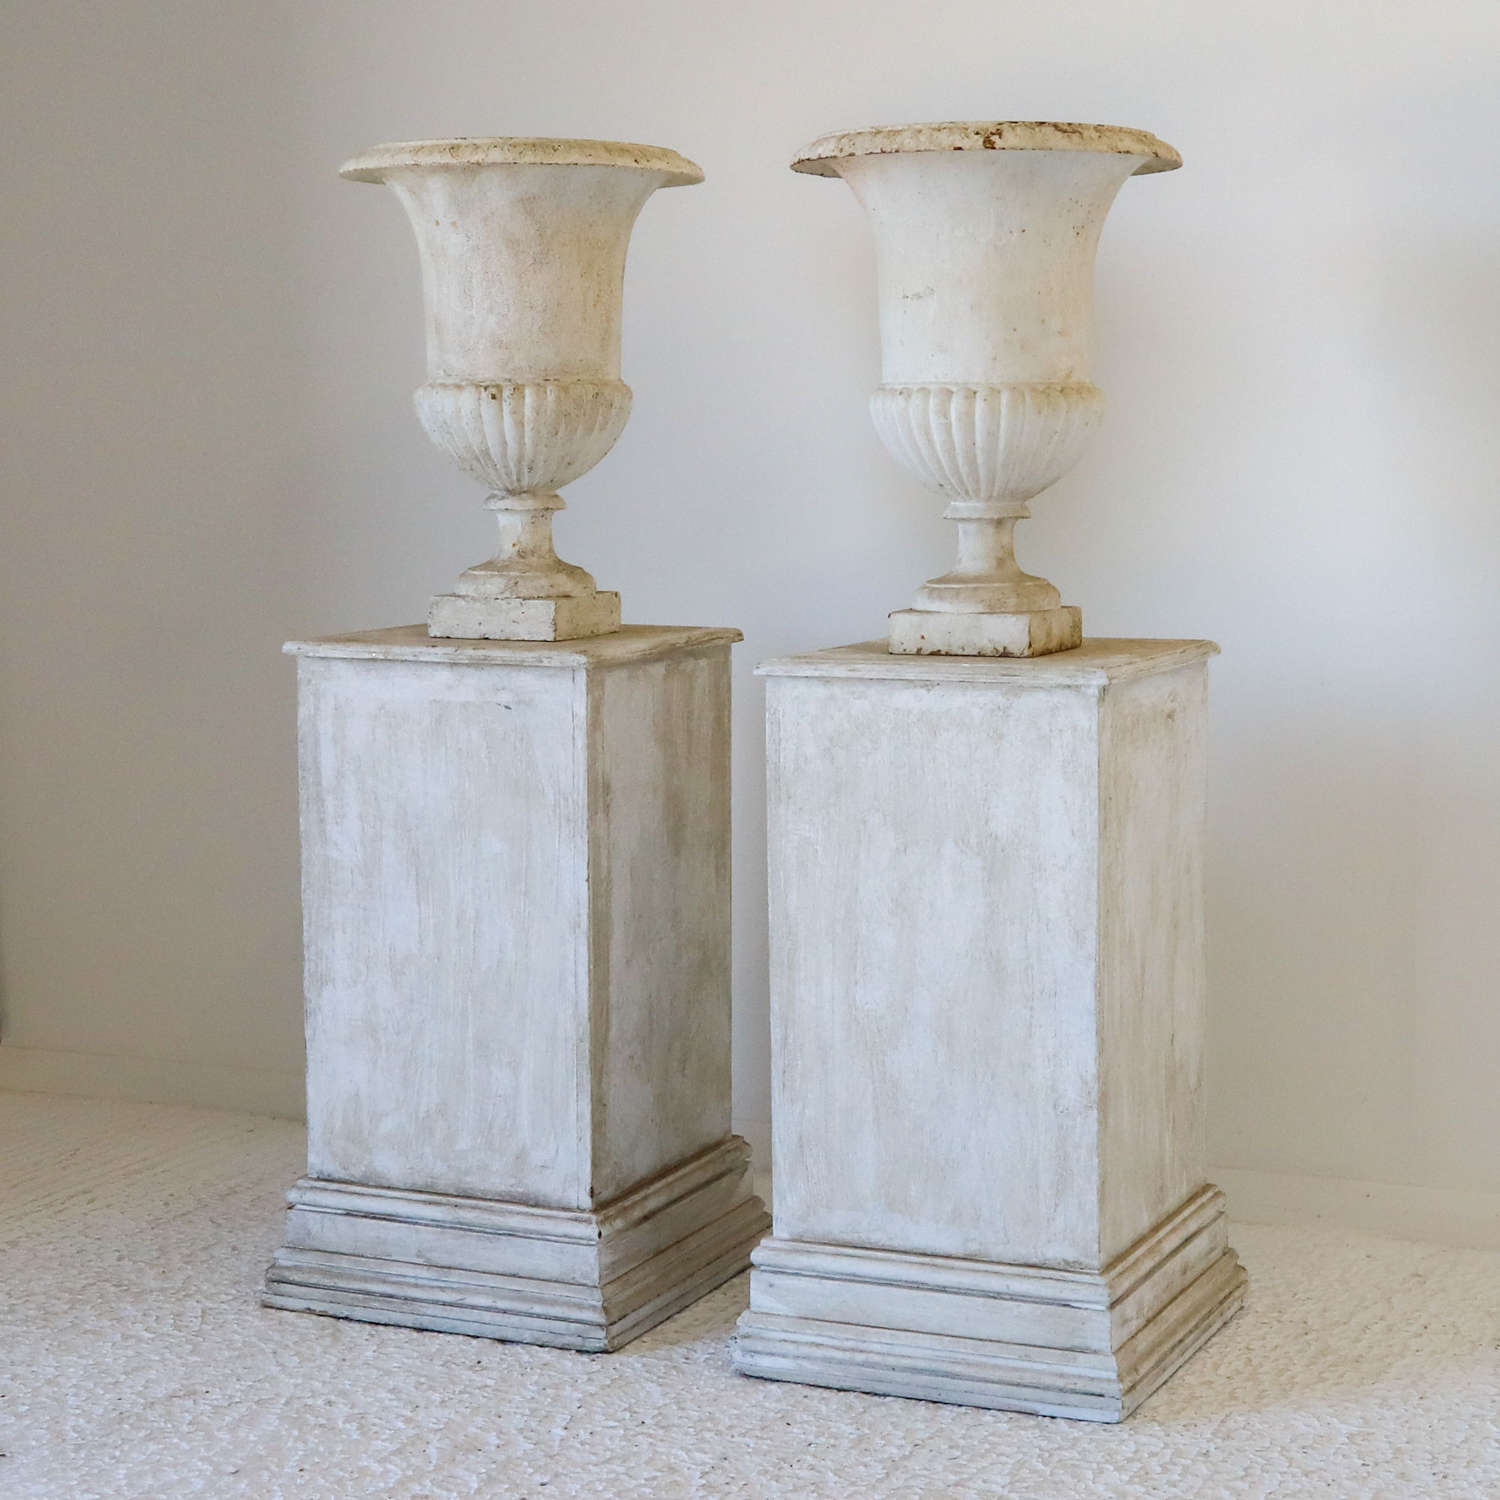 A Pair of Urns on Stands